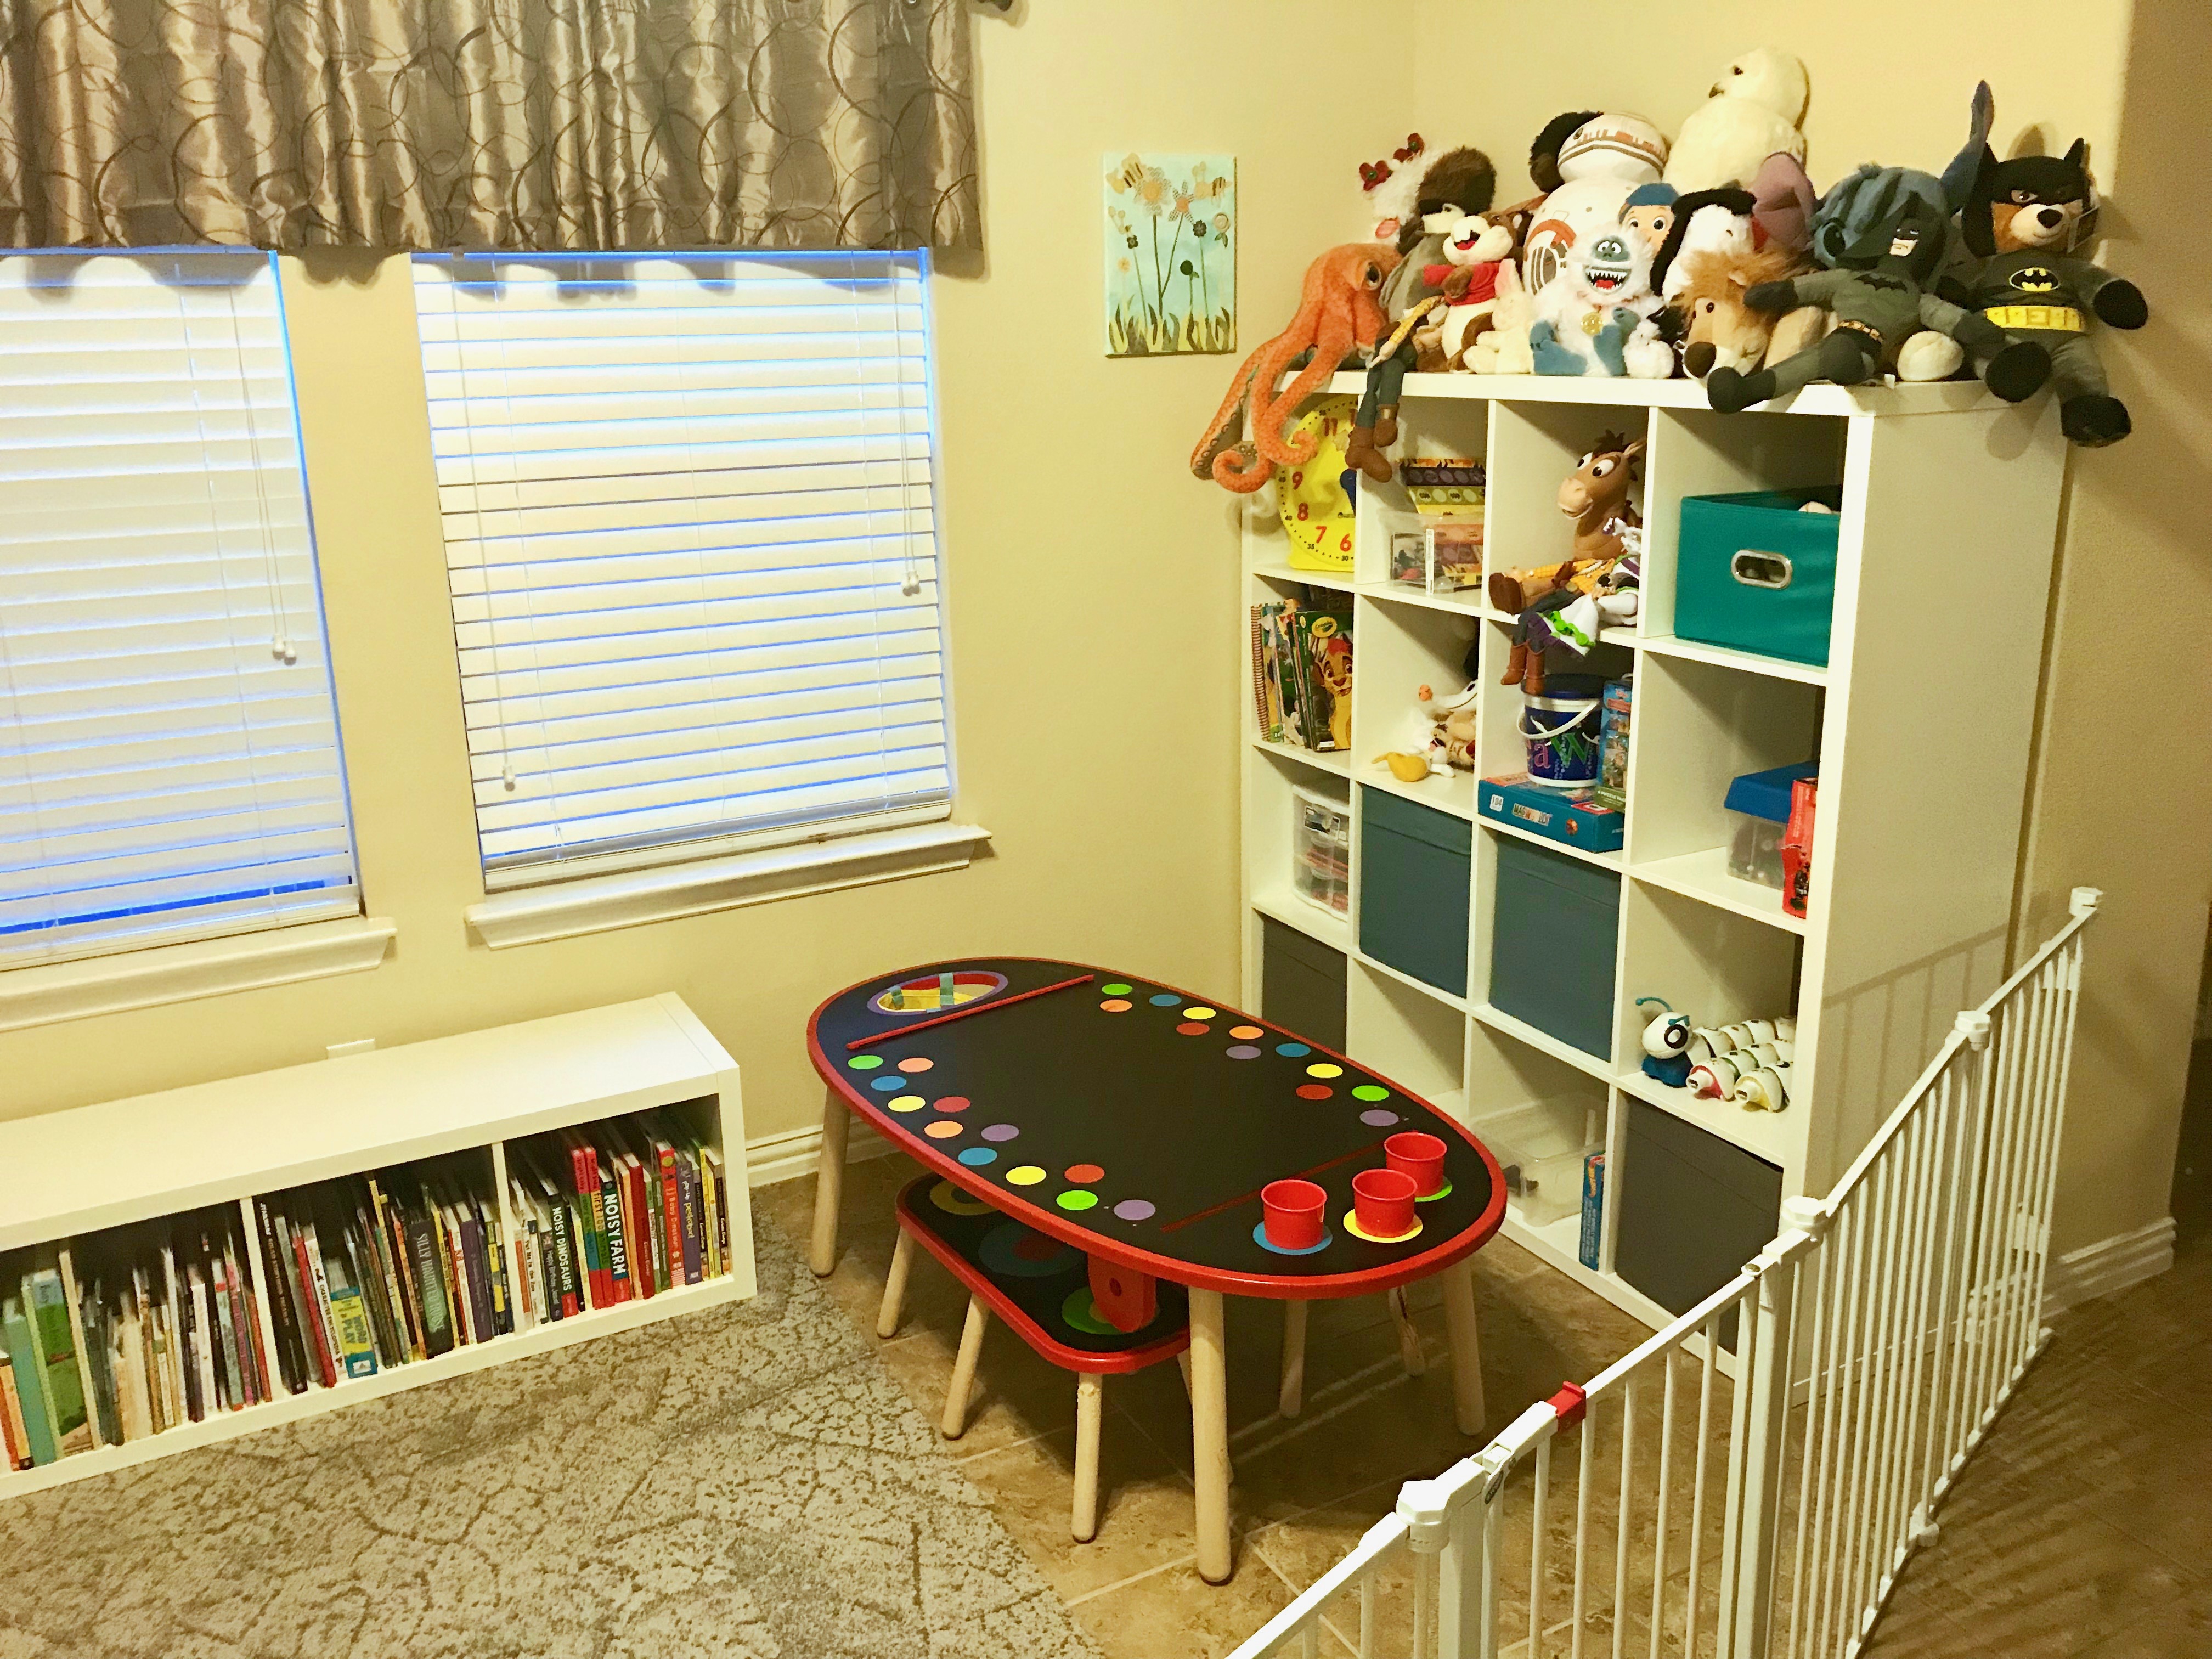 Playroom design on a budget. We used IKEA storage to create a fun kid friendly place for our son to craft, create, and play with plenty of storage for his toys.